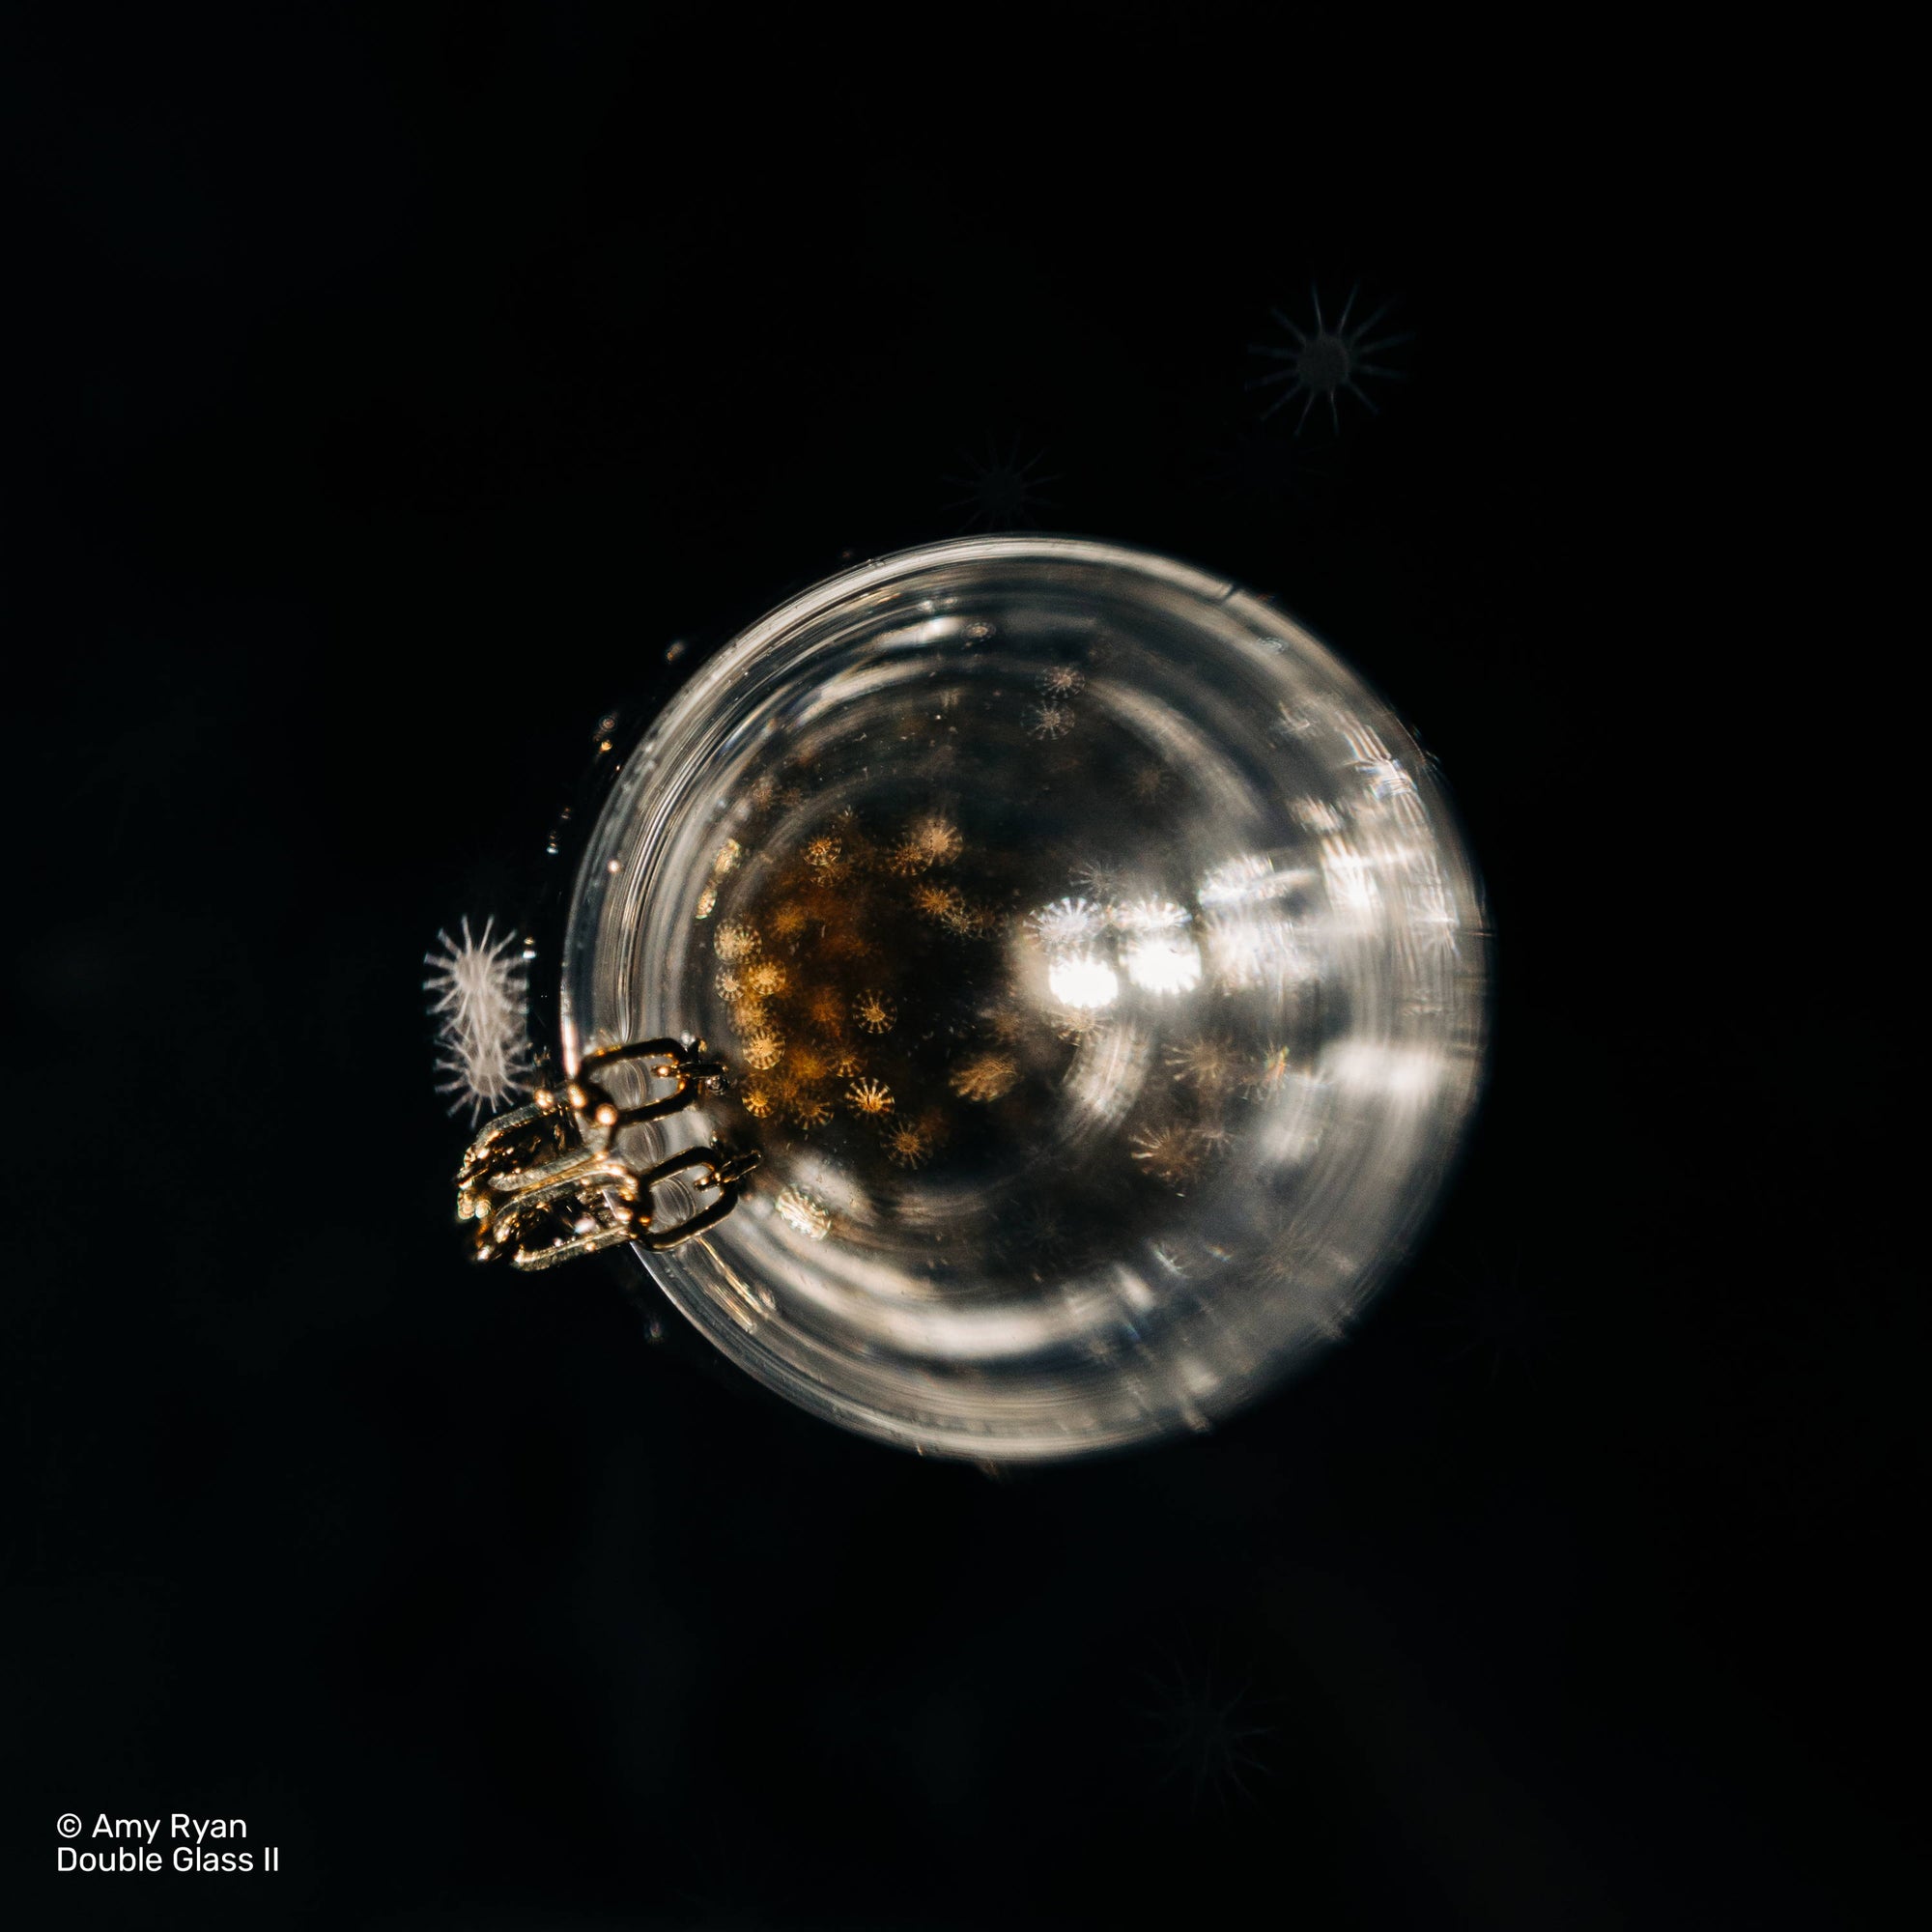 Macro with the Double Glass II | Photos of the Week